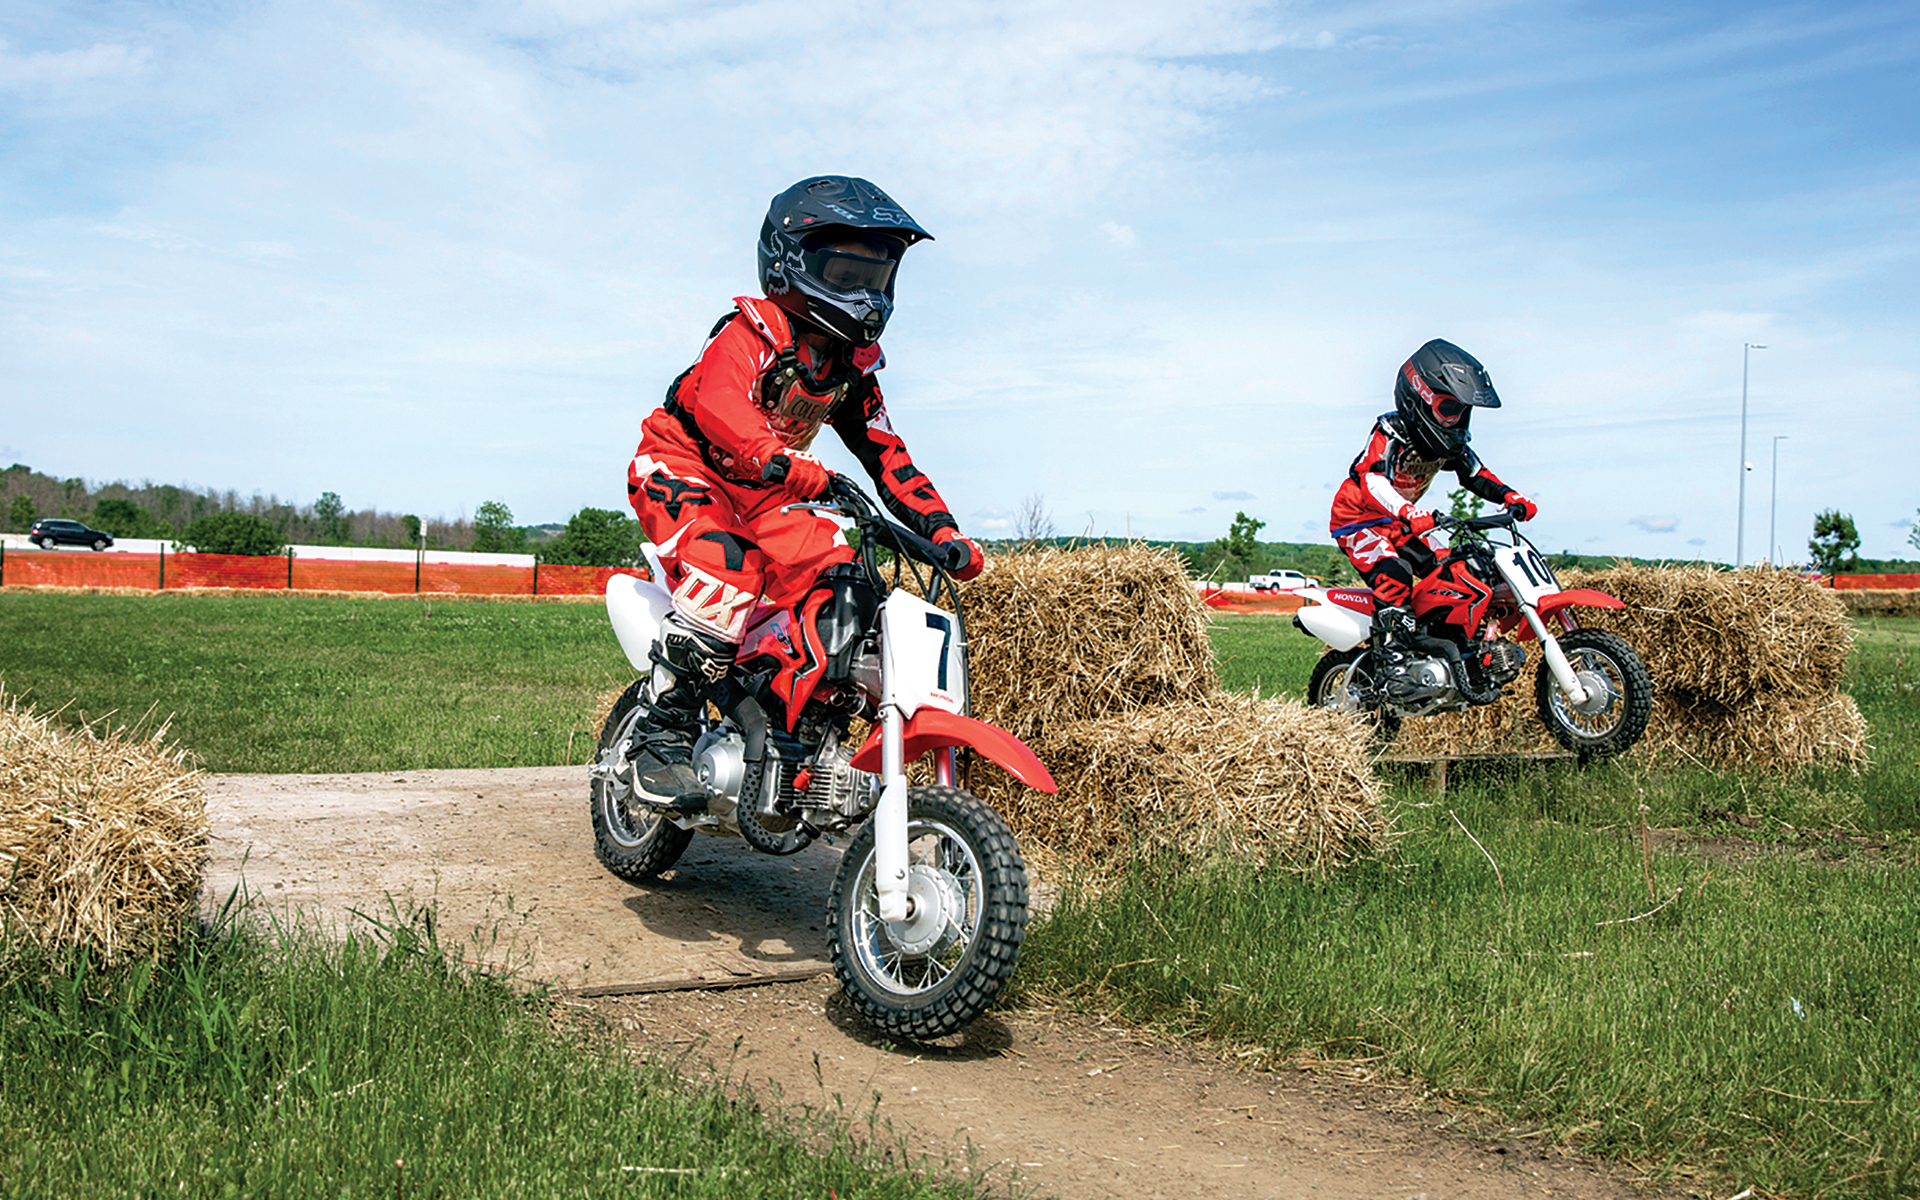 The Best Inexpensive Motorcycles for Kids